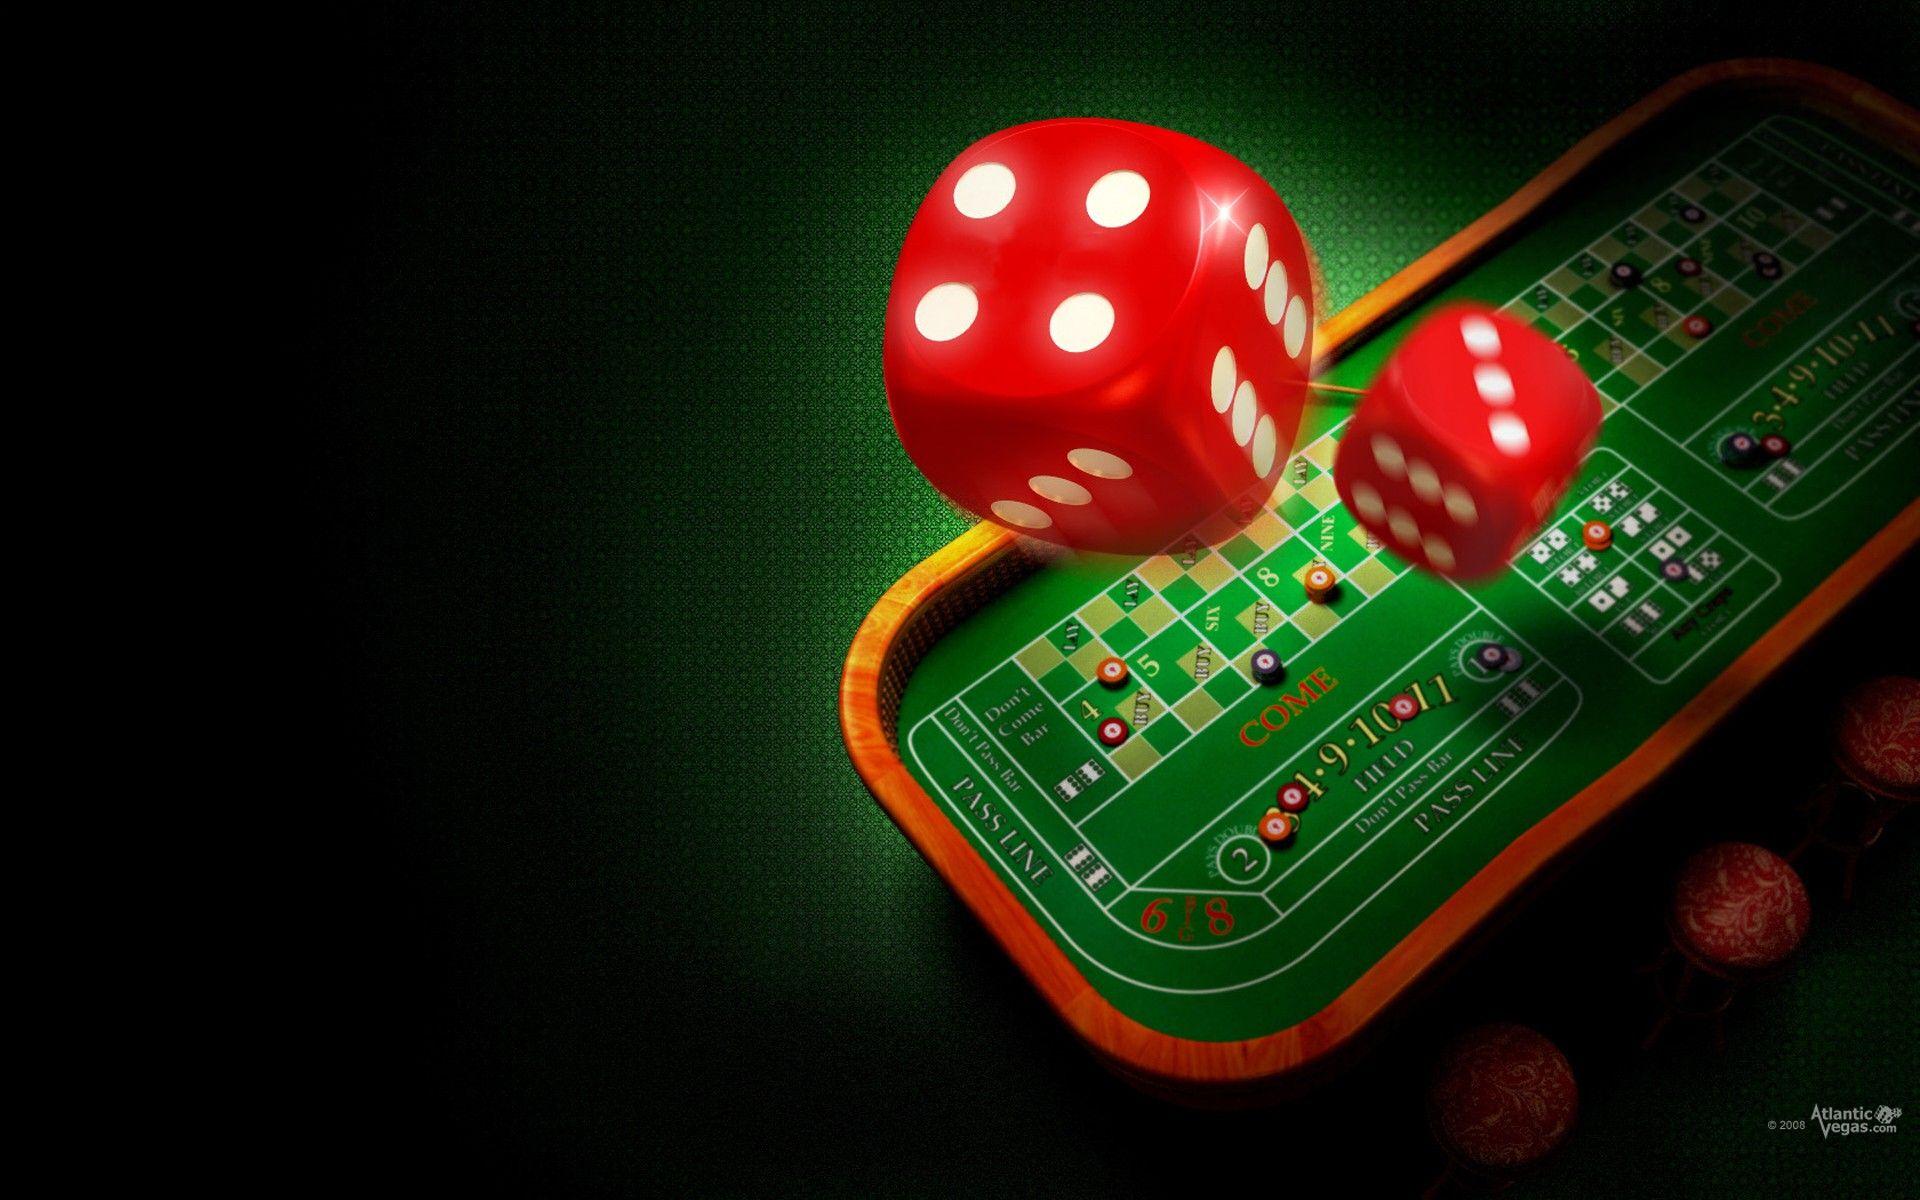 Scores Casino download the new